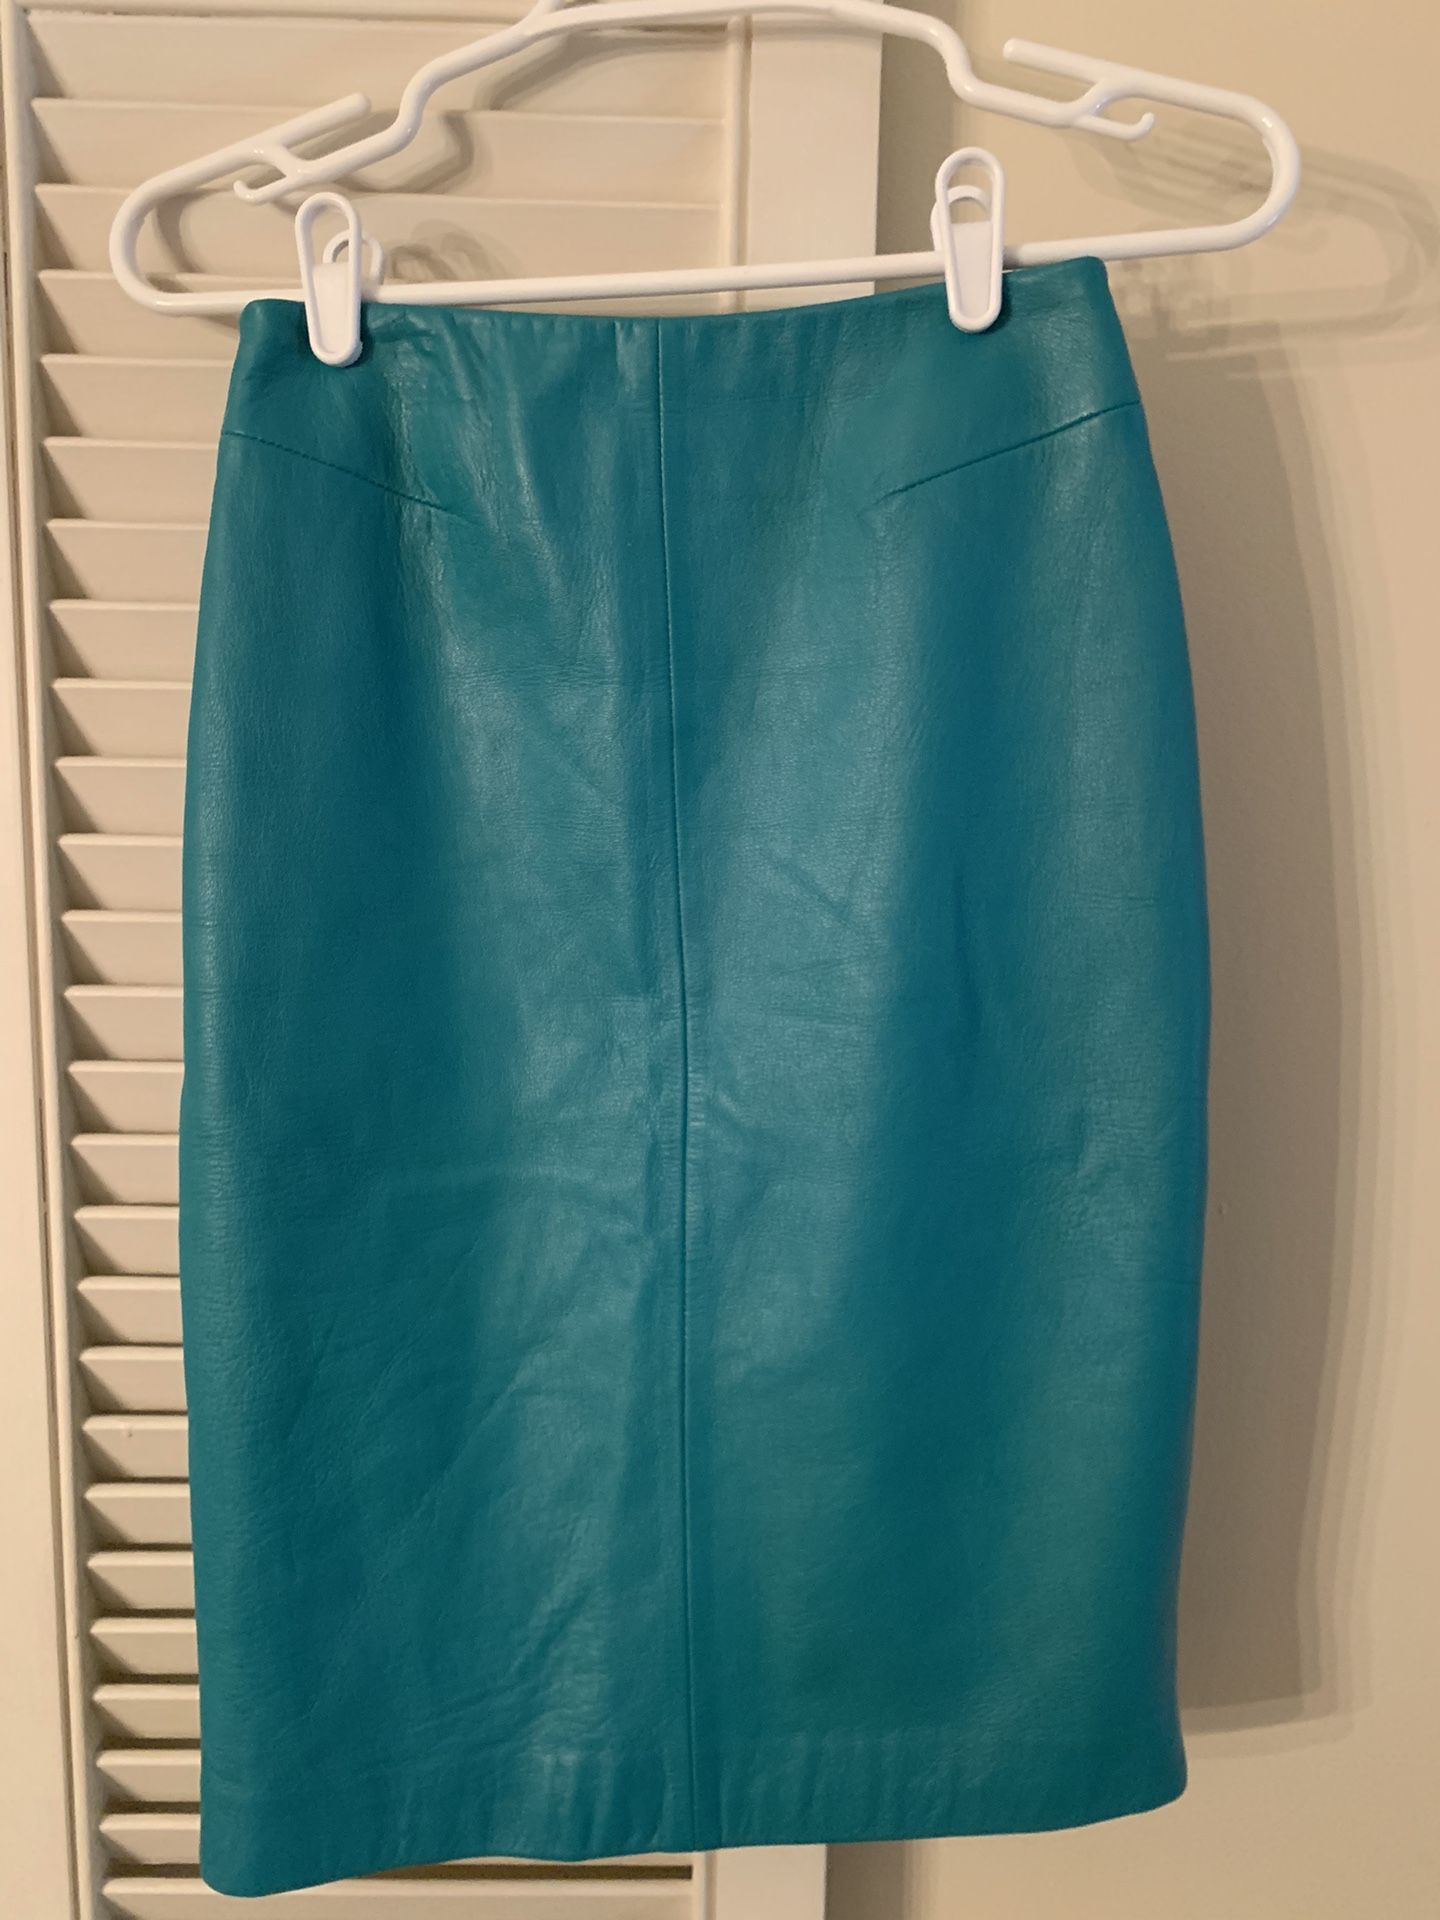 The Real Teal Leather Skirt from Saks